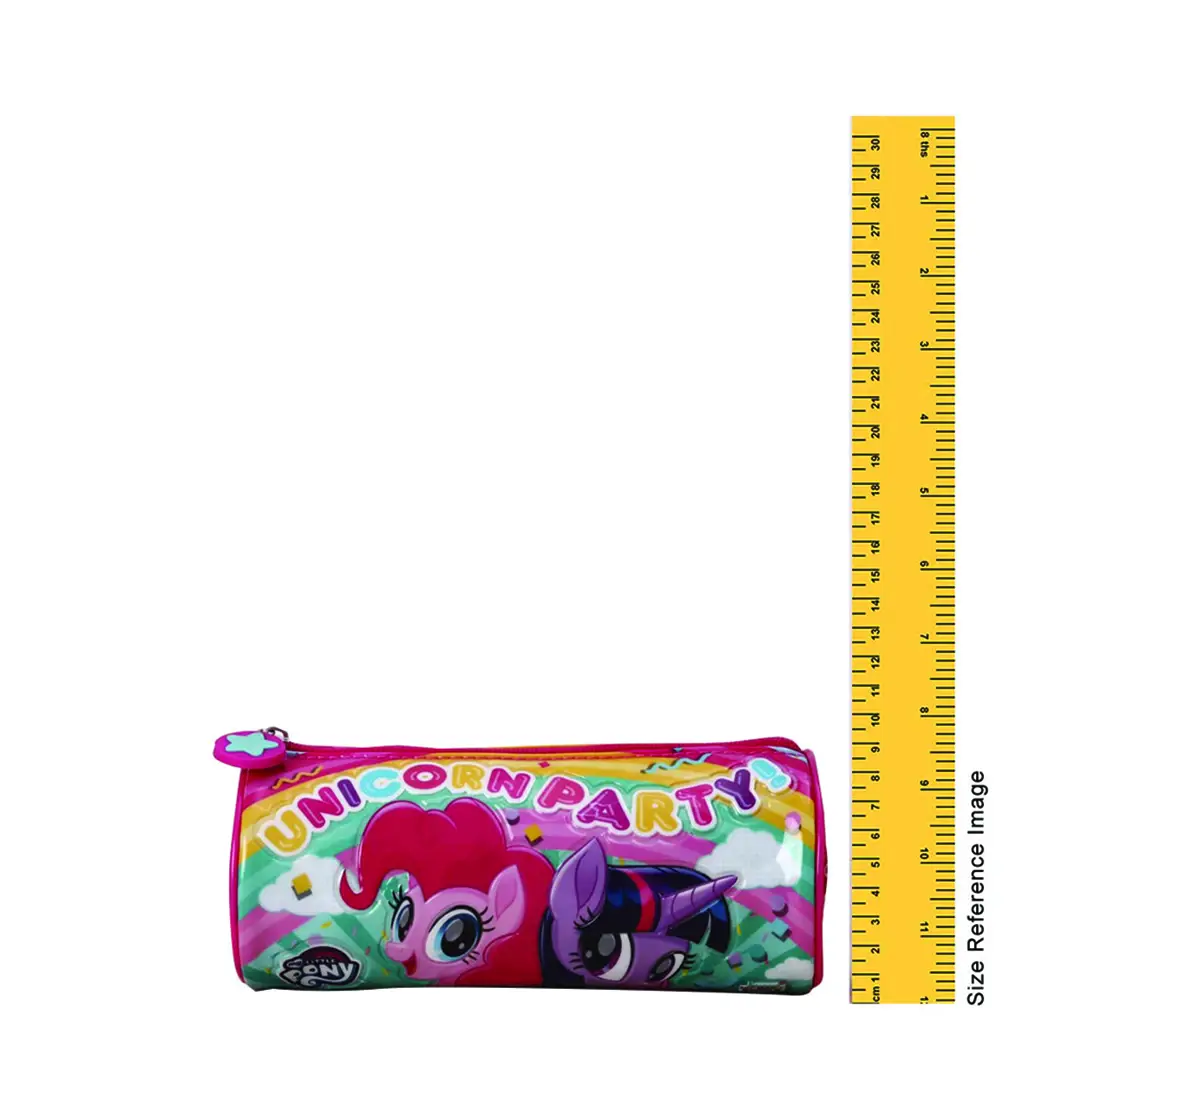 Hasbro My Little Pony Pink Round Pouch, Quirky Soft Toys for age 3Y+ - 23 Cm (Pink)